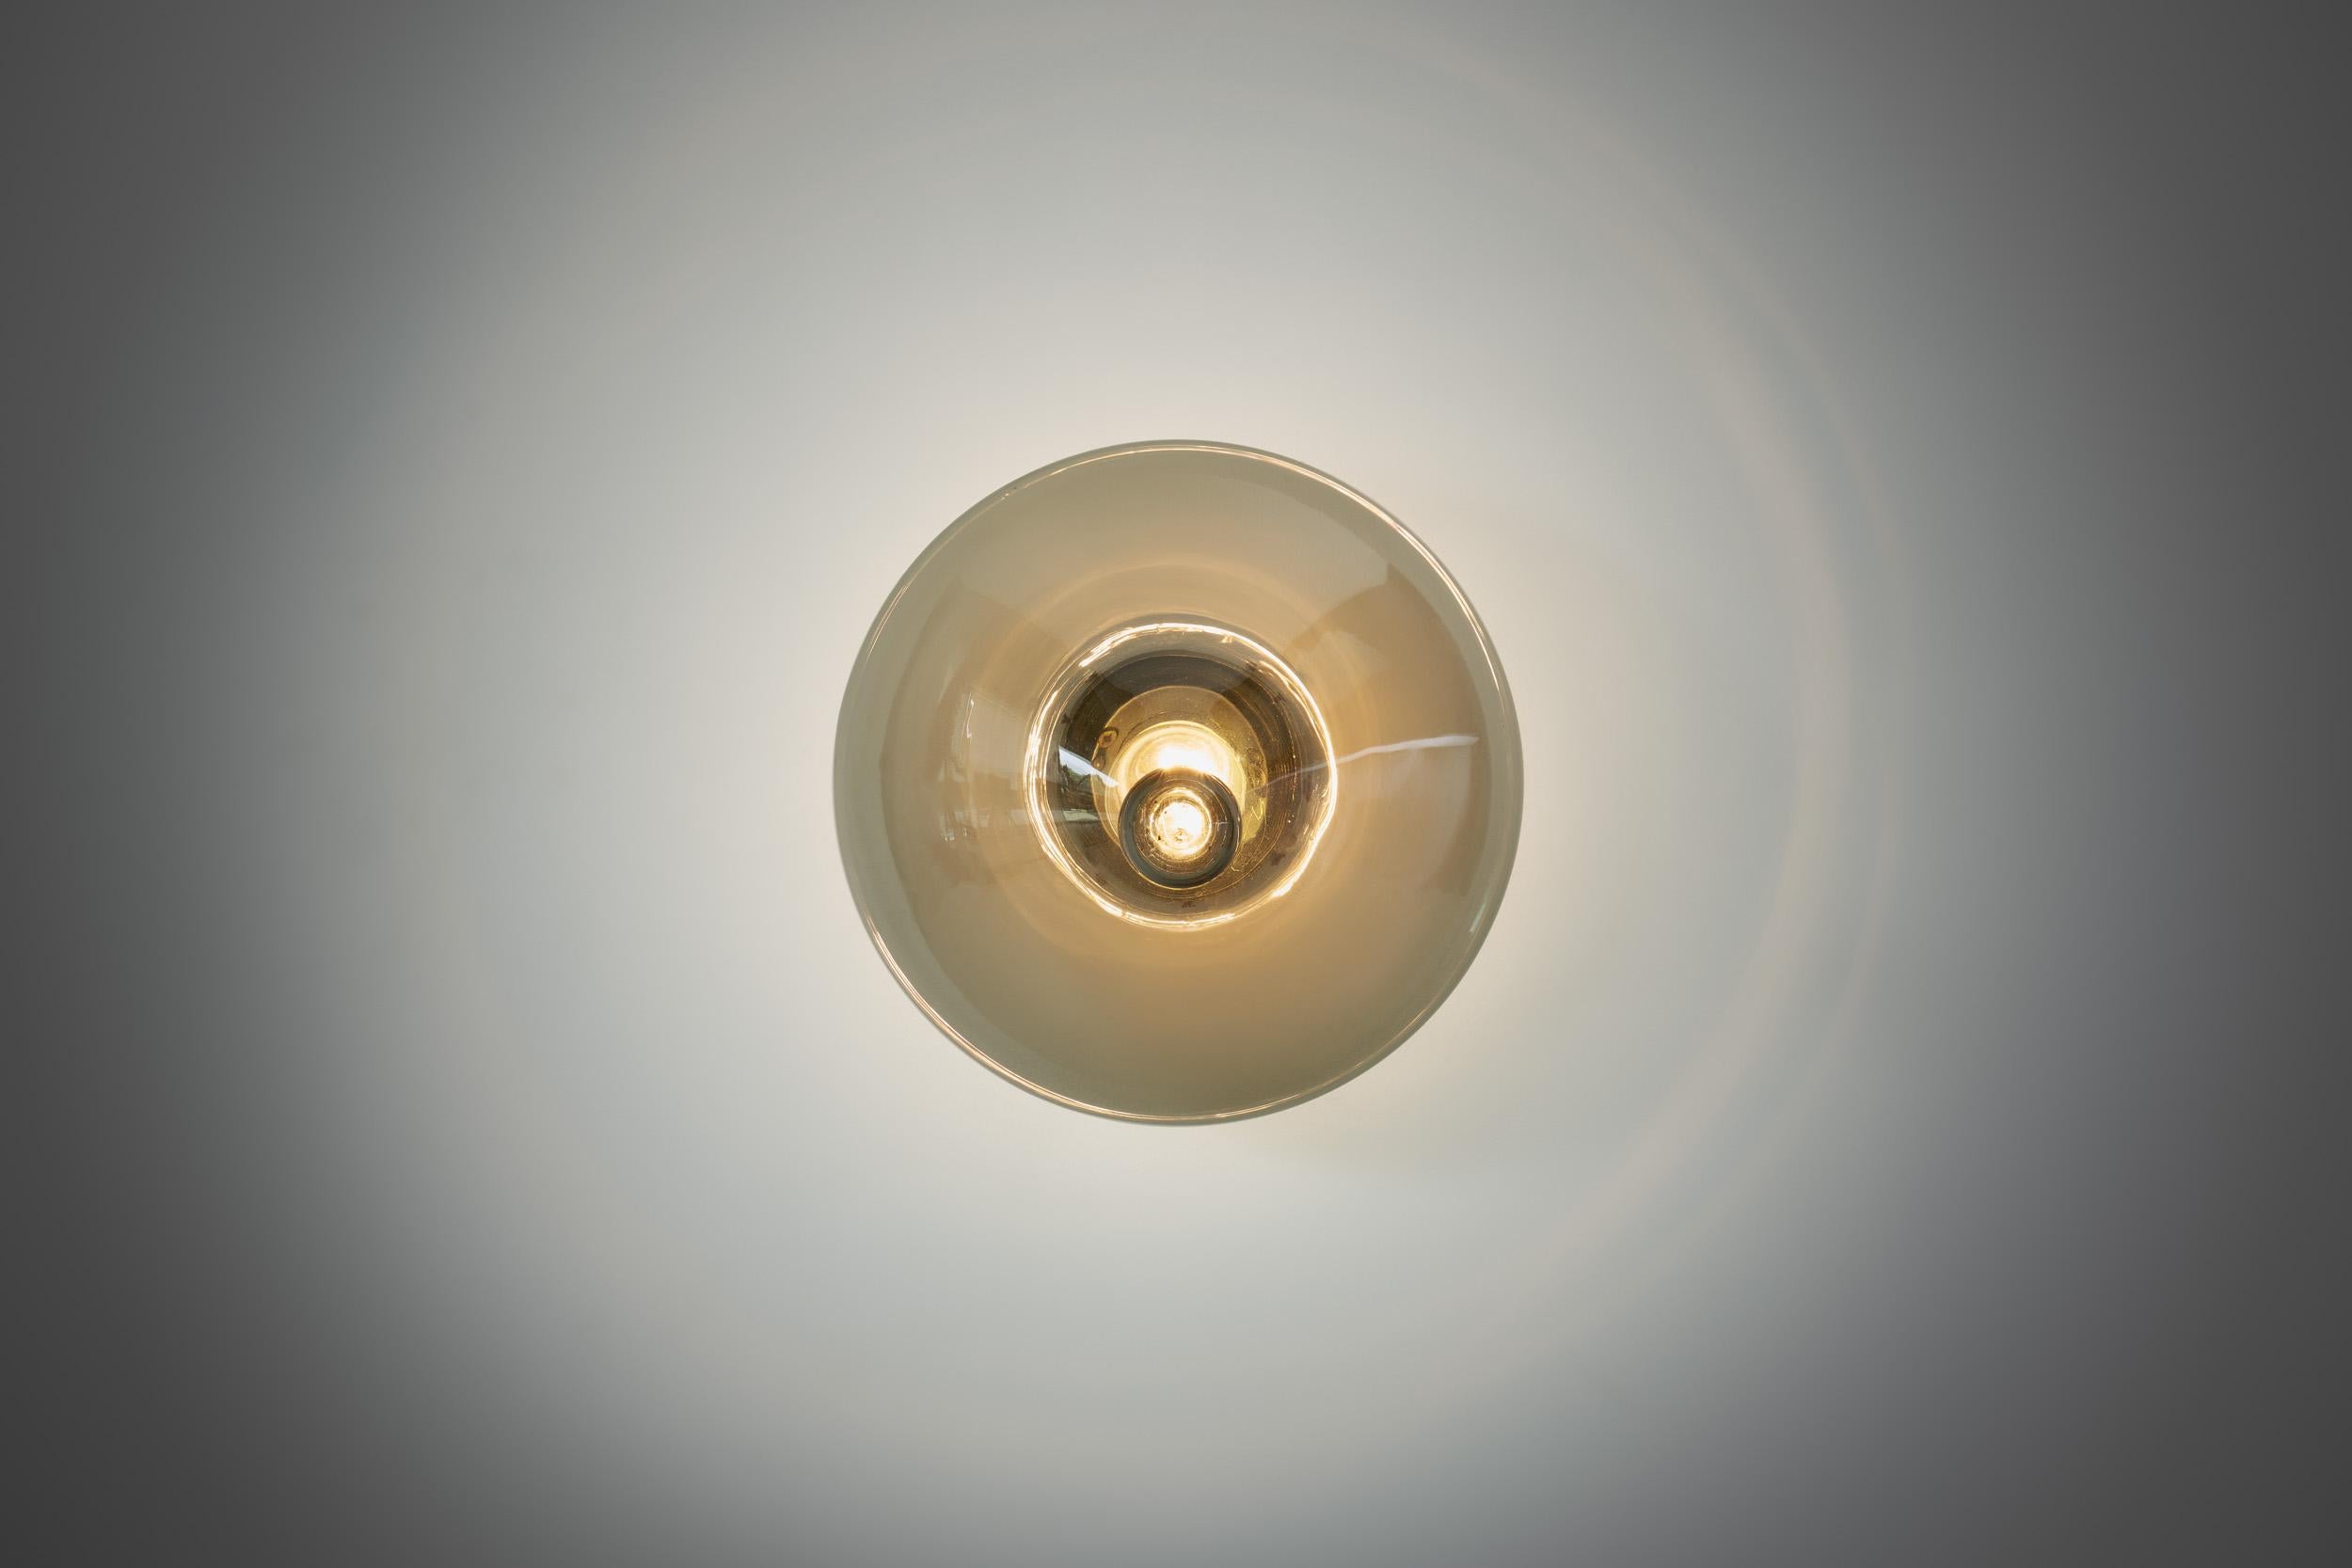 These lovely Dutch ceiling or wall lamps are Raak’s model B-1052, better known as the “Chaparral”. Made of high quality glass with brass details, this model is a unique design that both figuratively and literally stands out wherever it is